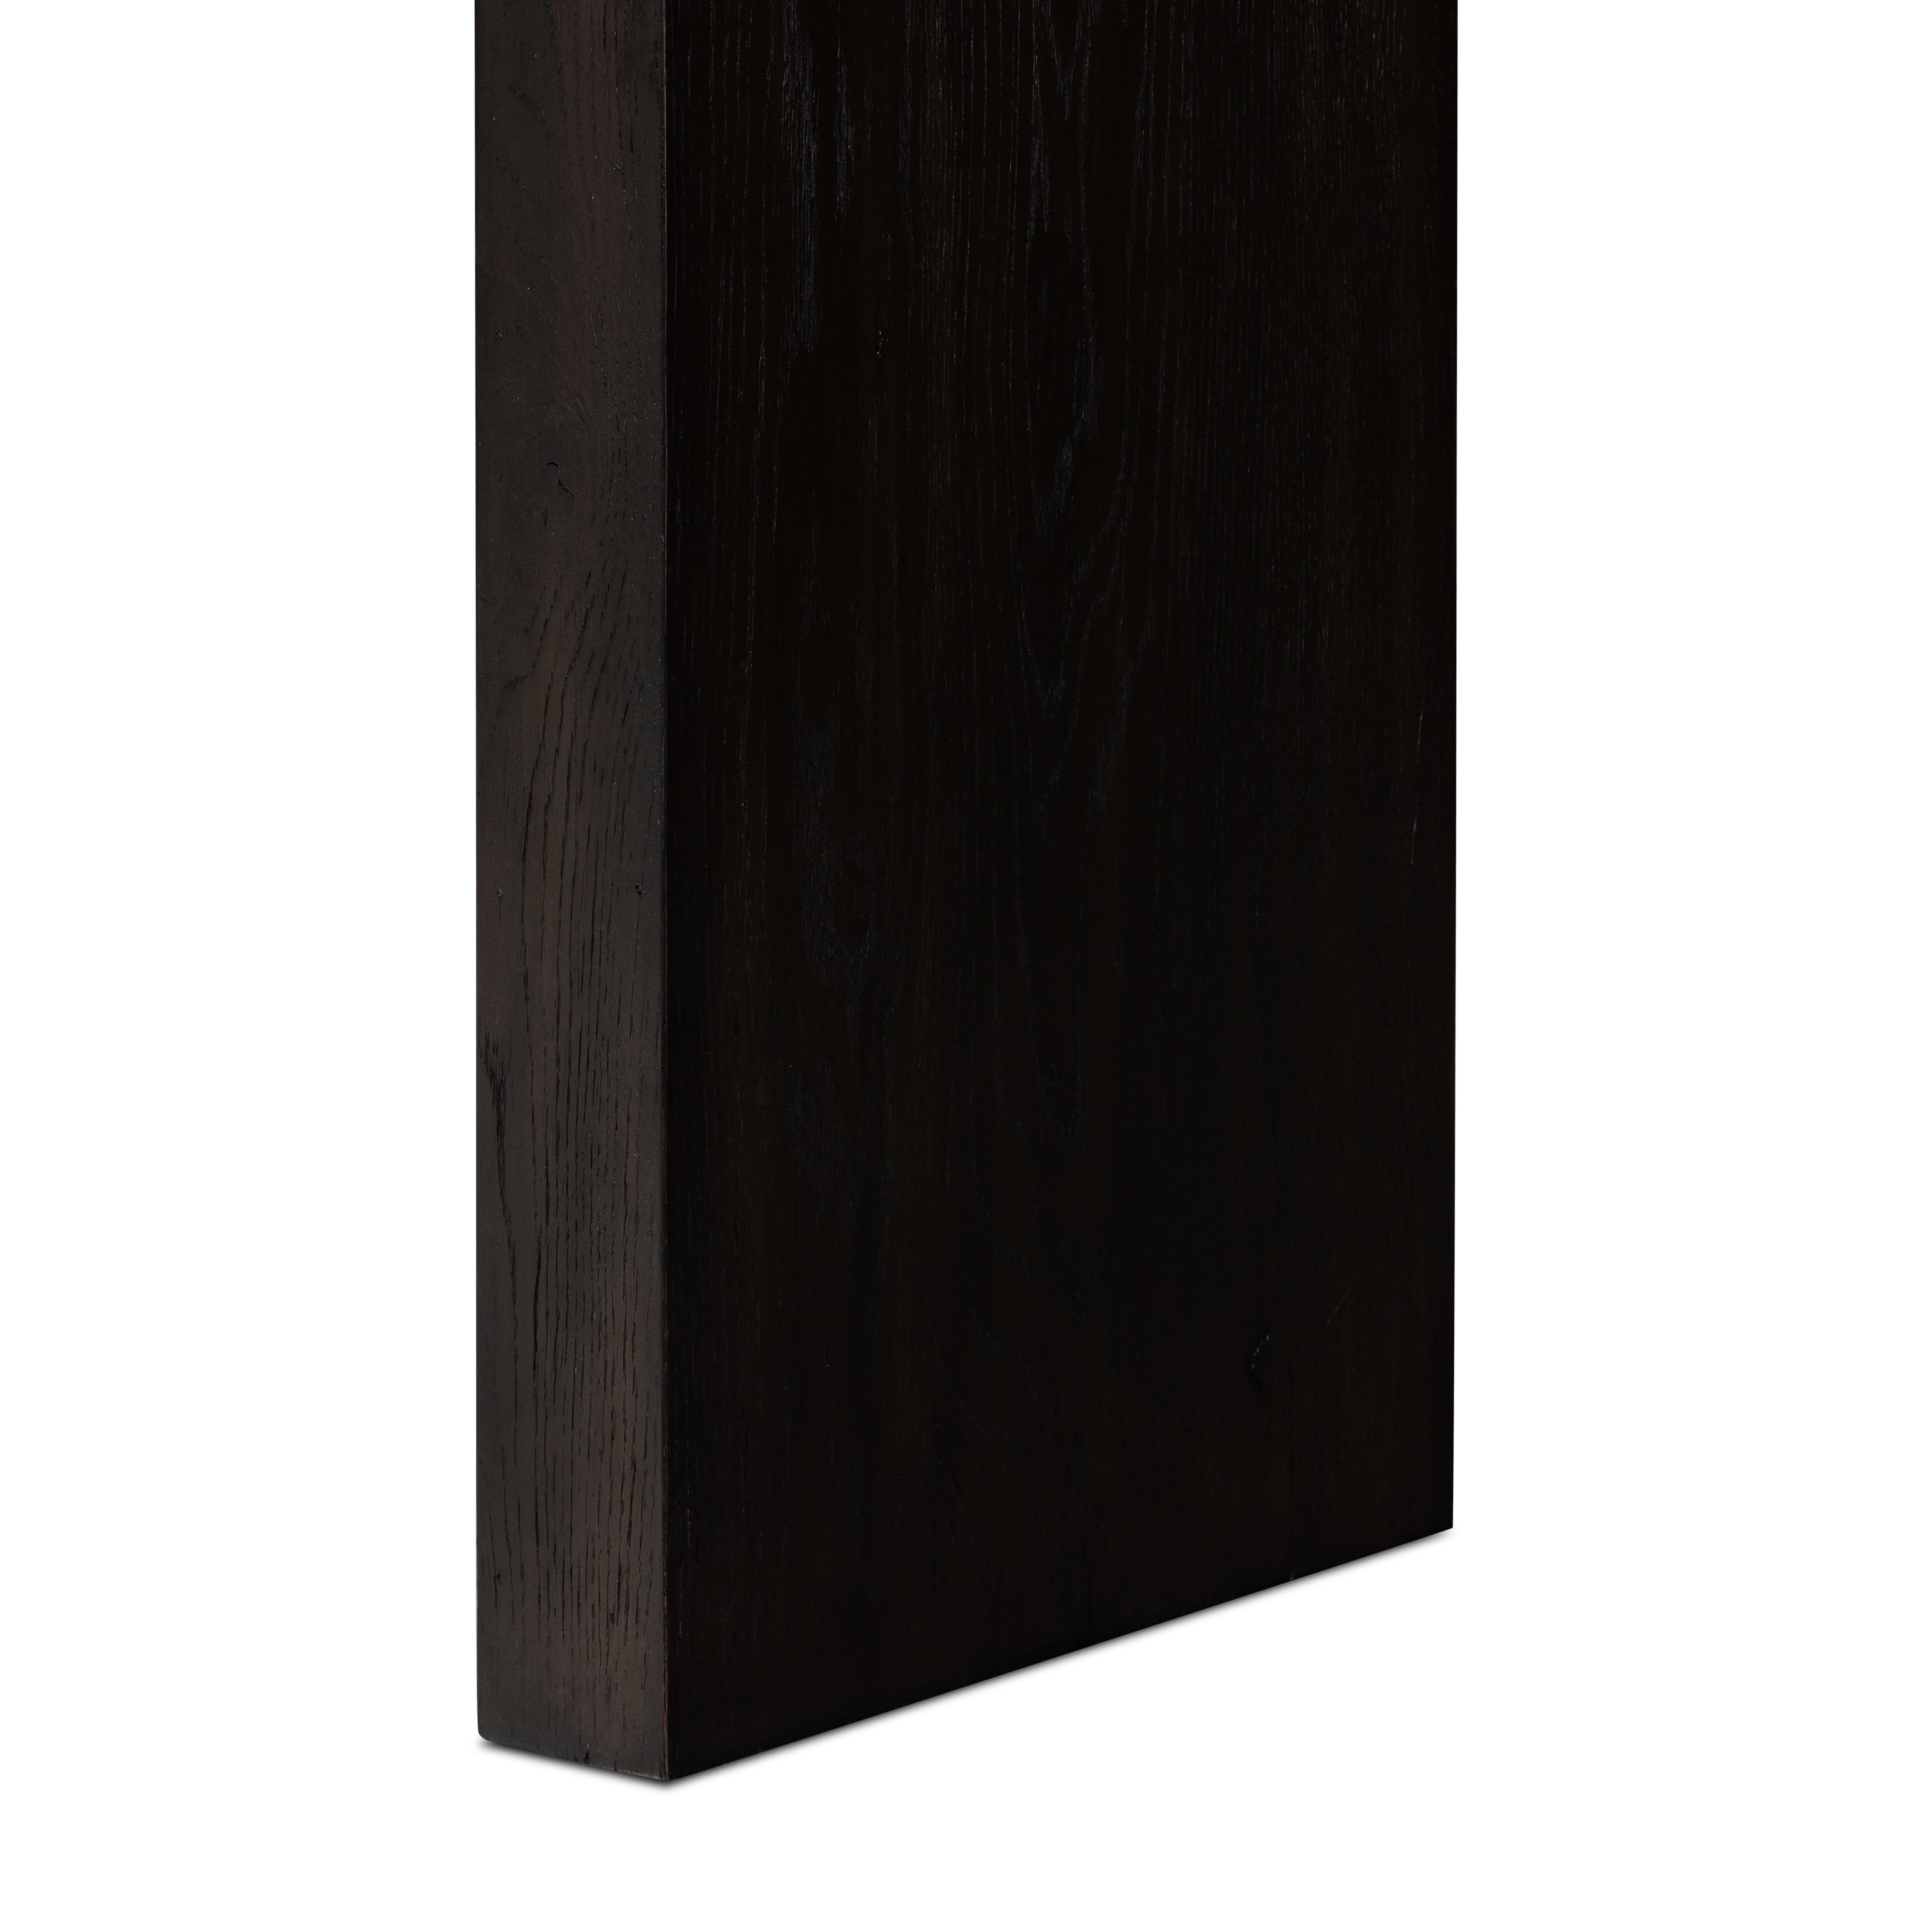 Matthes Console Table-Smoked Black - Image 6